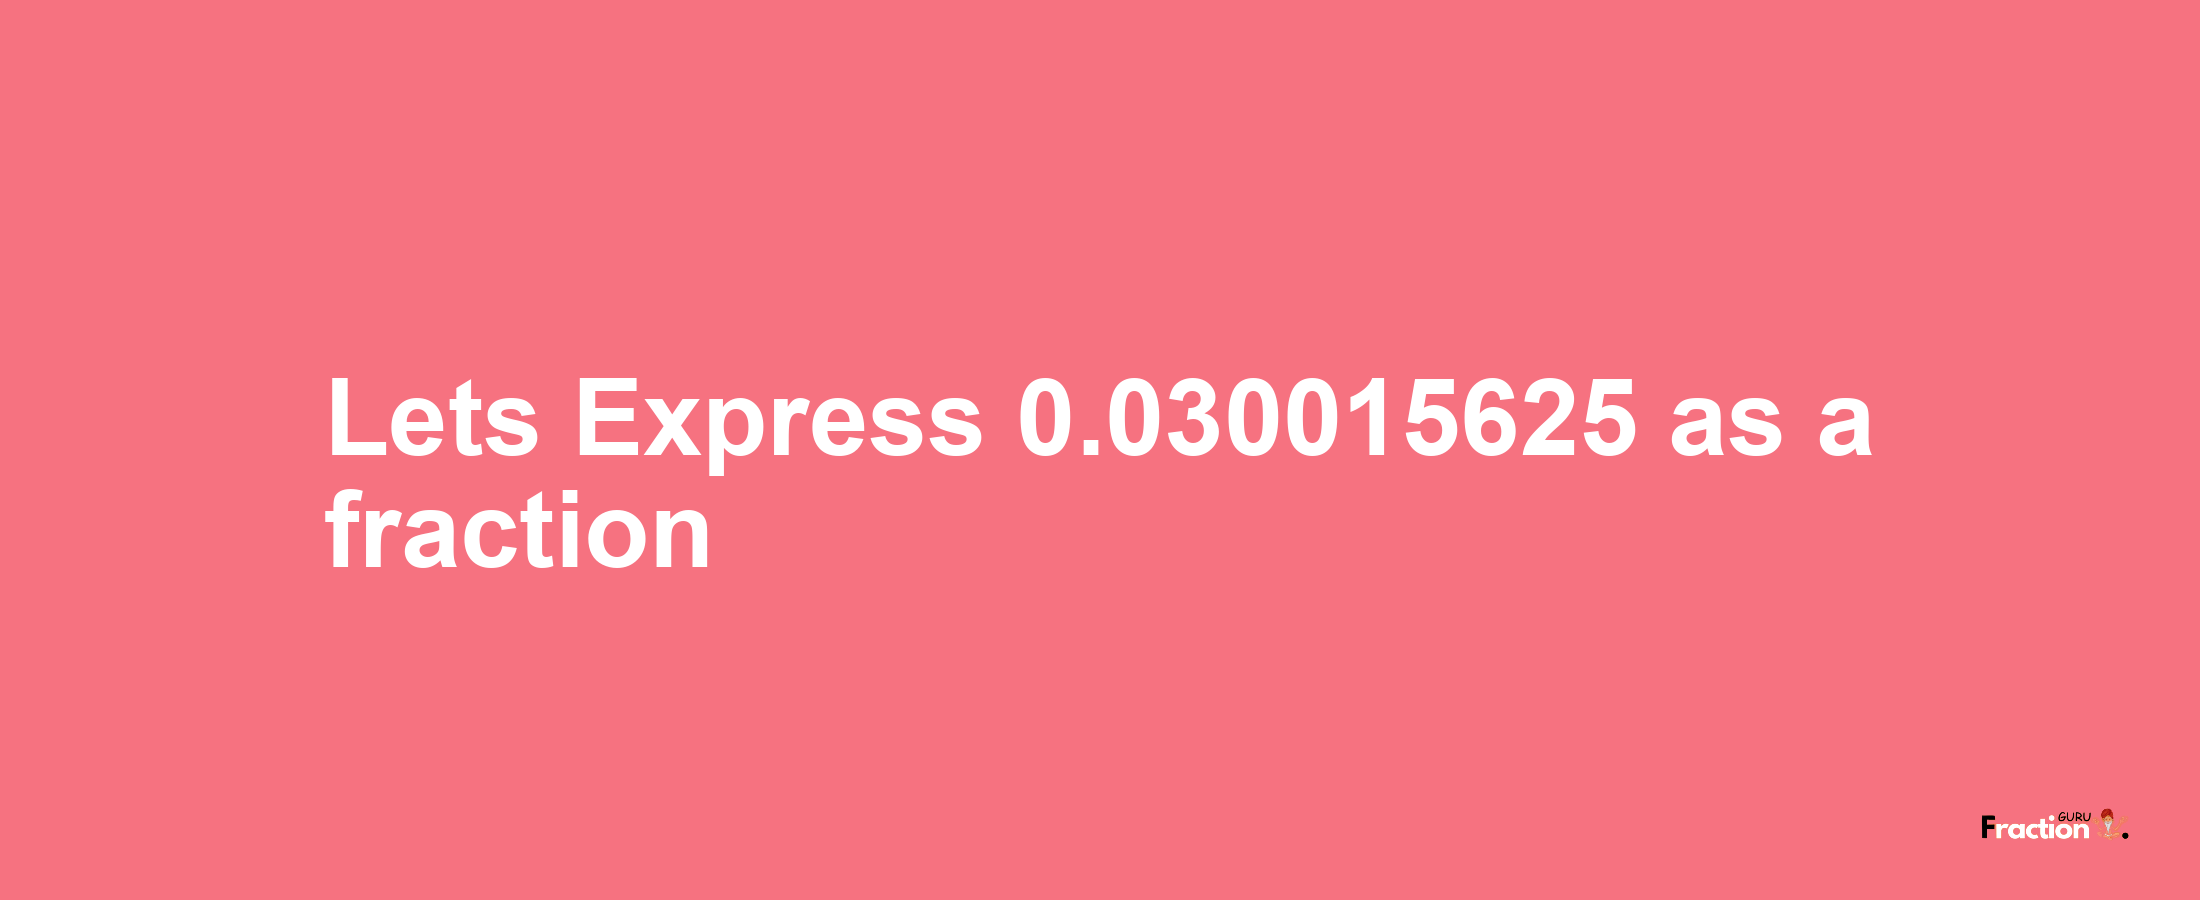 Lets Express 0.030015625 as afraction